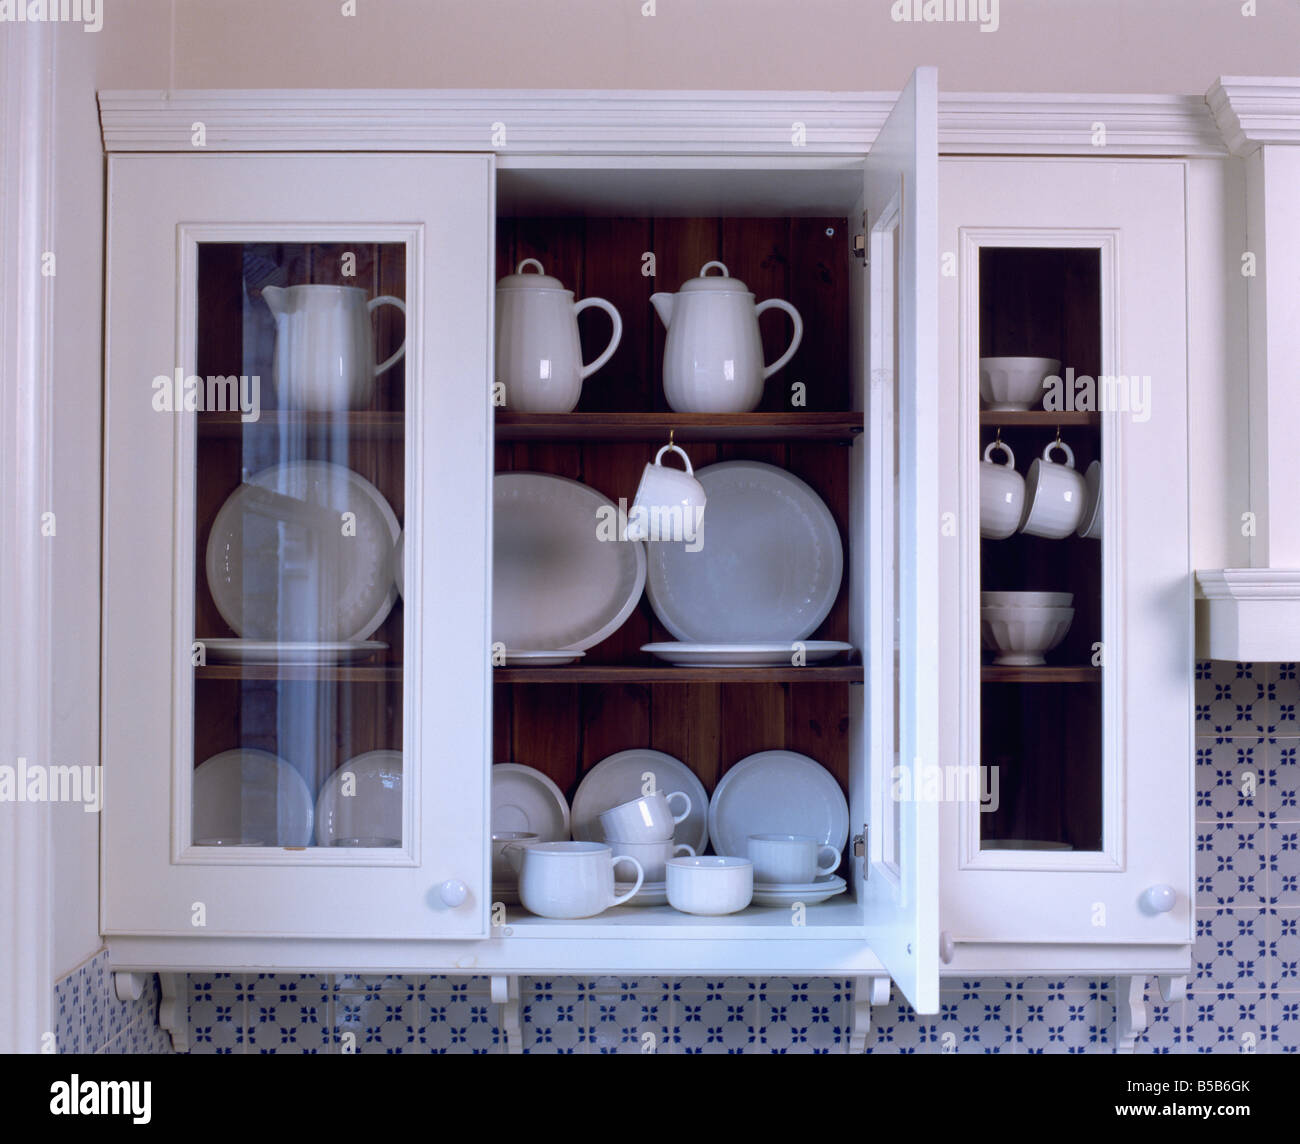 White wall cupboard with glass doors open to reveal white crockery on  shelves Stock Photo - Alamy